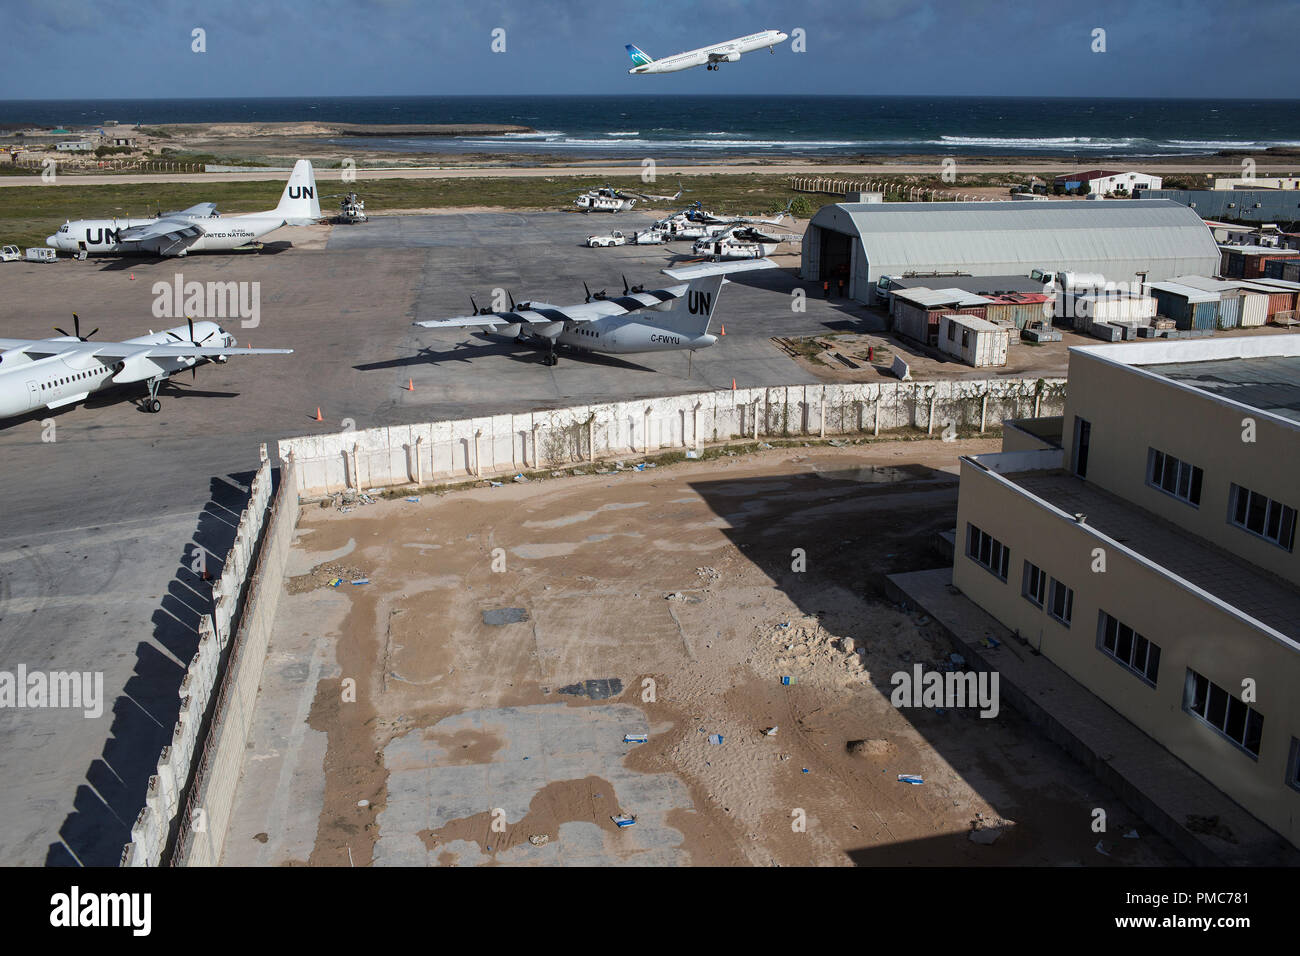 The first Daalo airlines plane takes off since it was bombed,  Aden Abdulle airport inside the African Union Mission in Somalia (AMISOM) base in Mogad Stock Photo